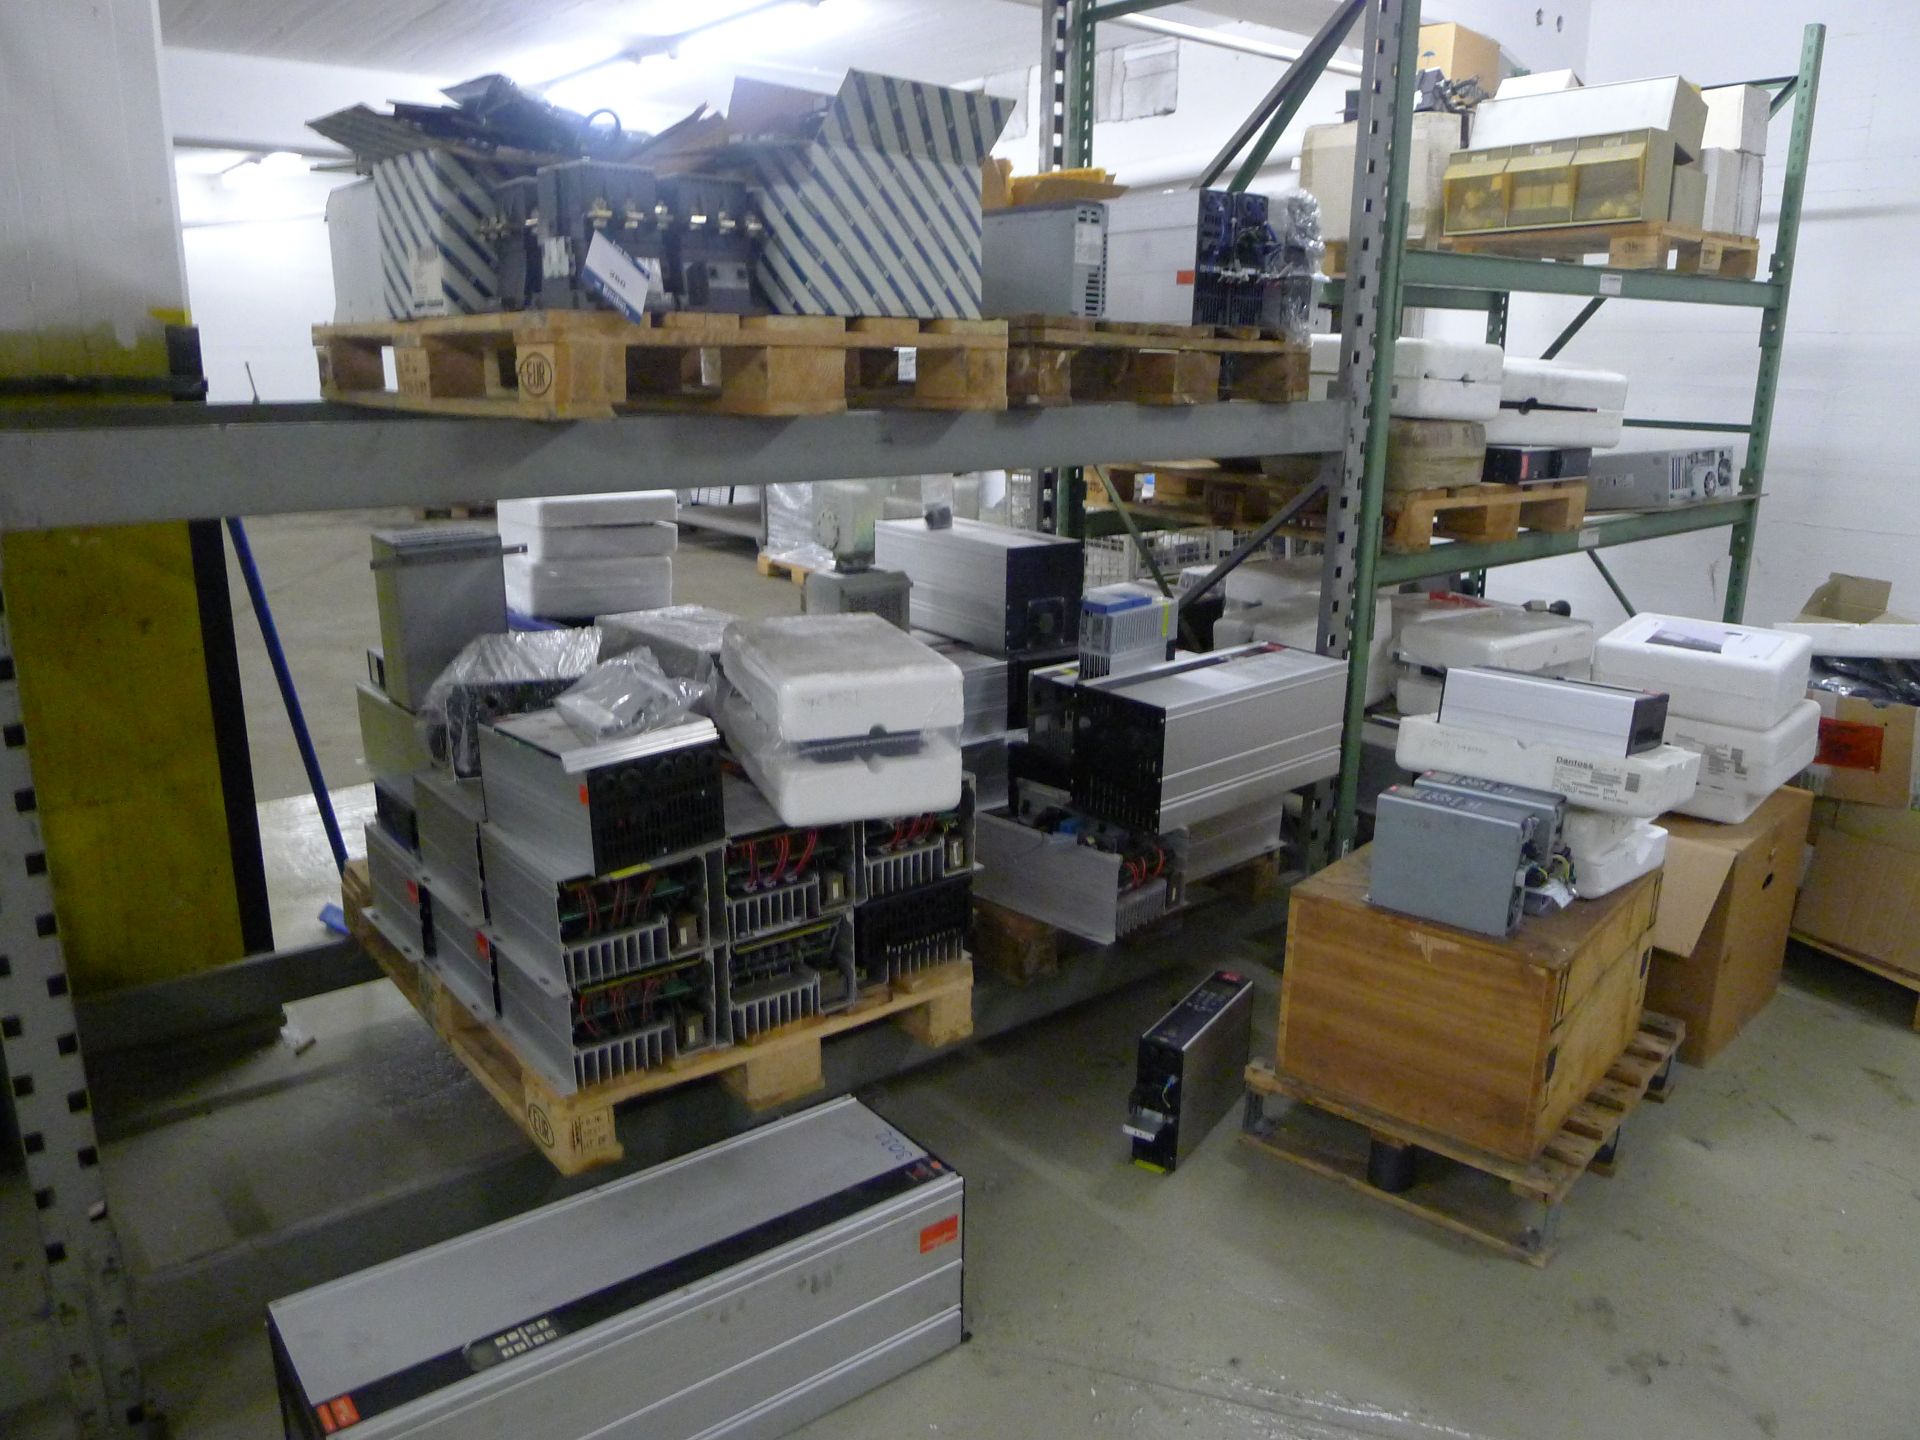 Contents to 4 Bays of Racking to Include: Danfoss Variable Speed/ Automation Drives (Dismantling and